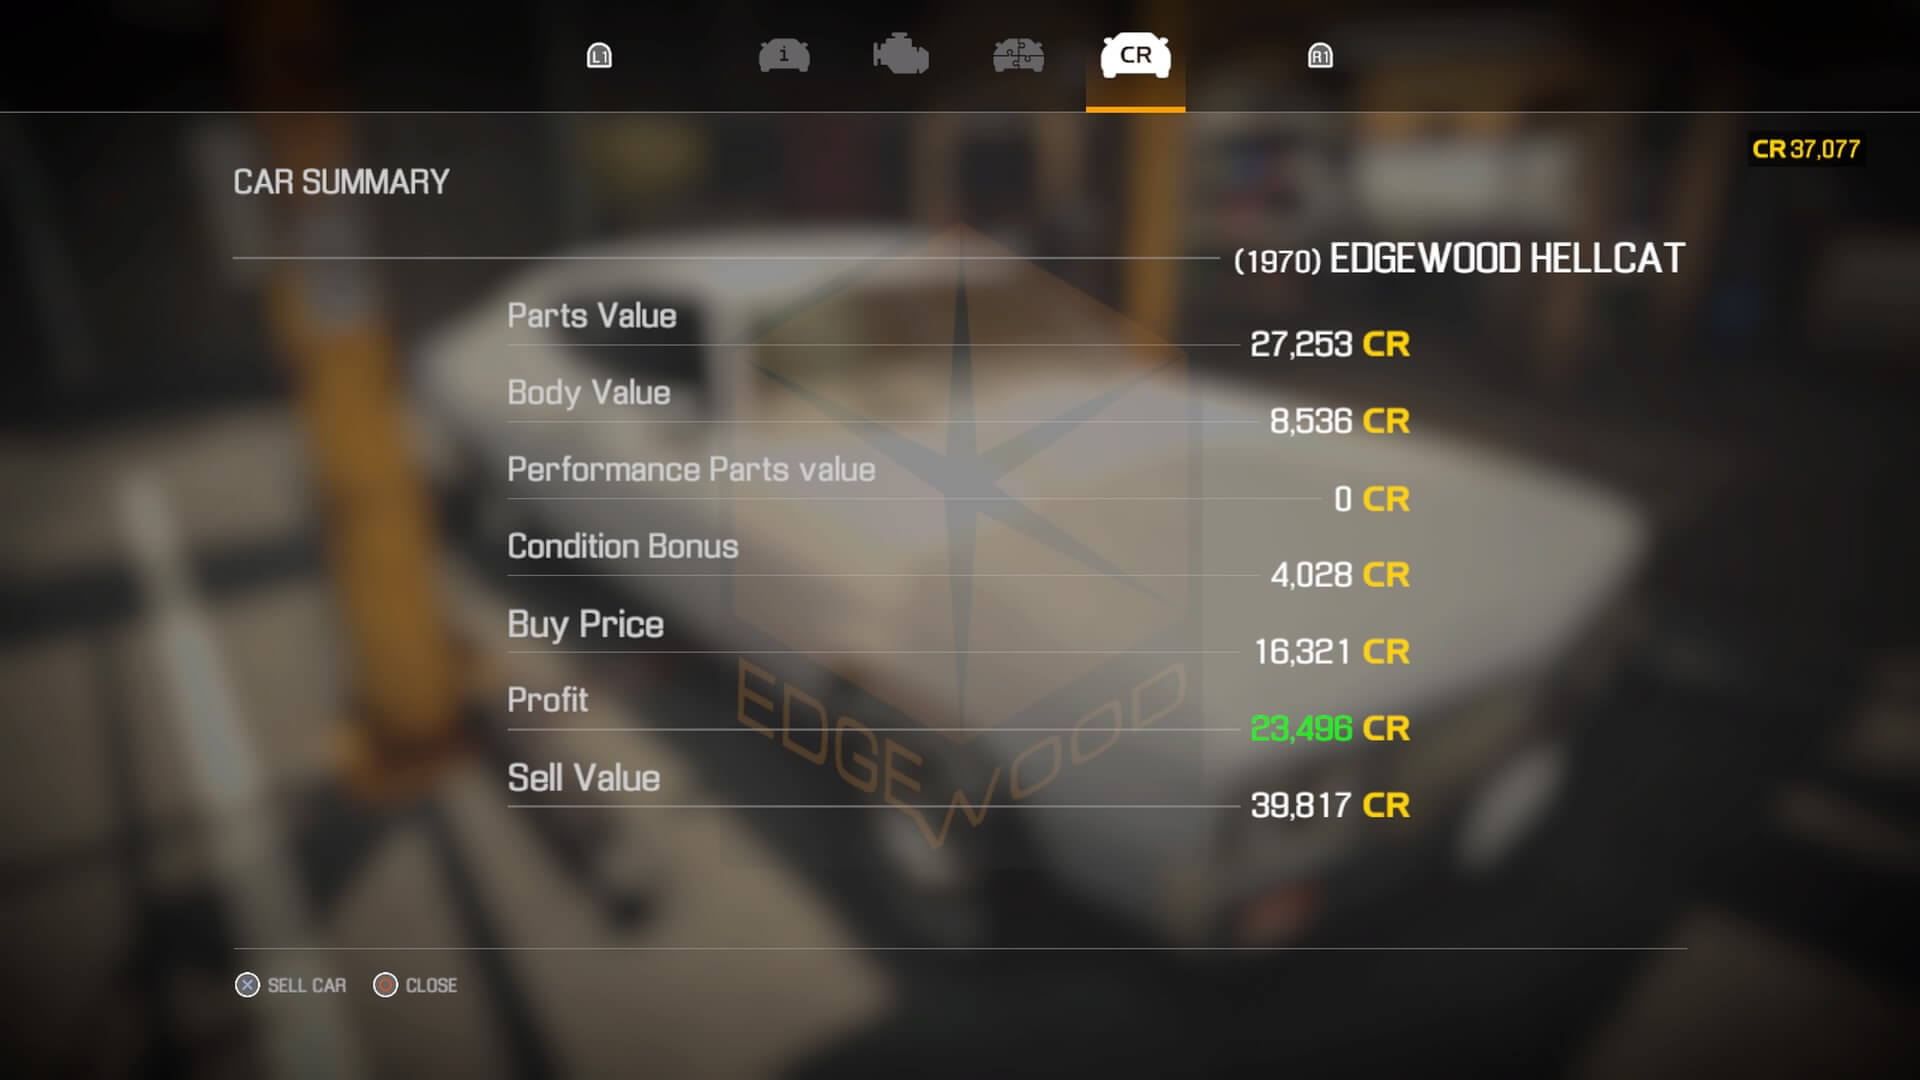 Screenshot showing the profit made from the 1970 Edgewood Hellcat